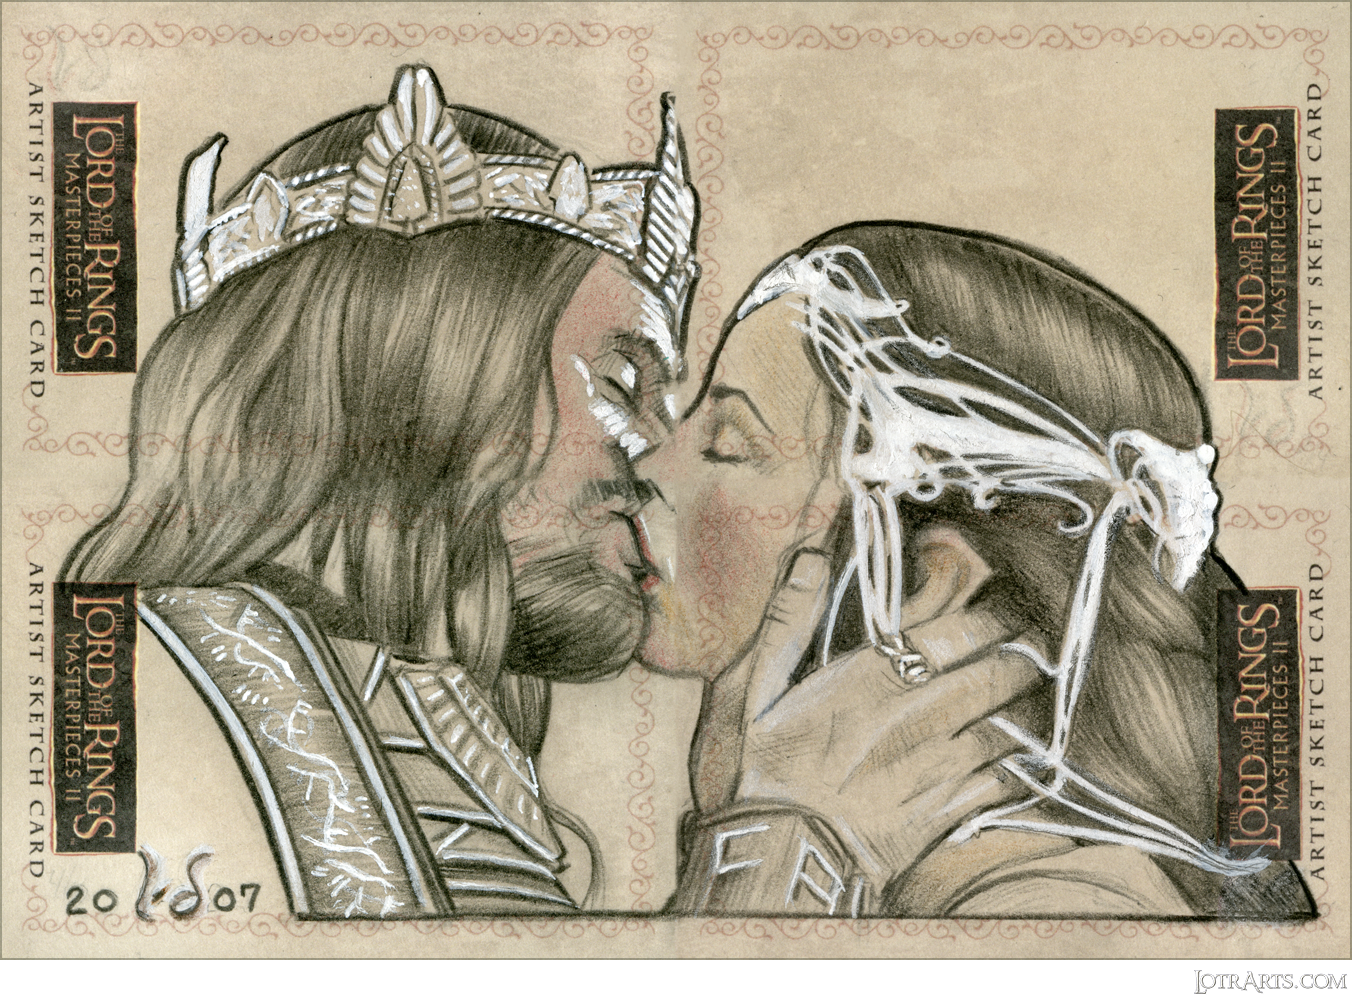 Aragorn and Arwen, four-card panel, by Doyle: artist return sketches<span class="ngViews">7 views</span>